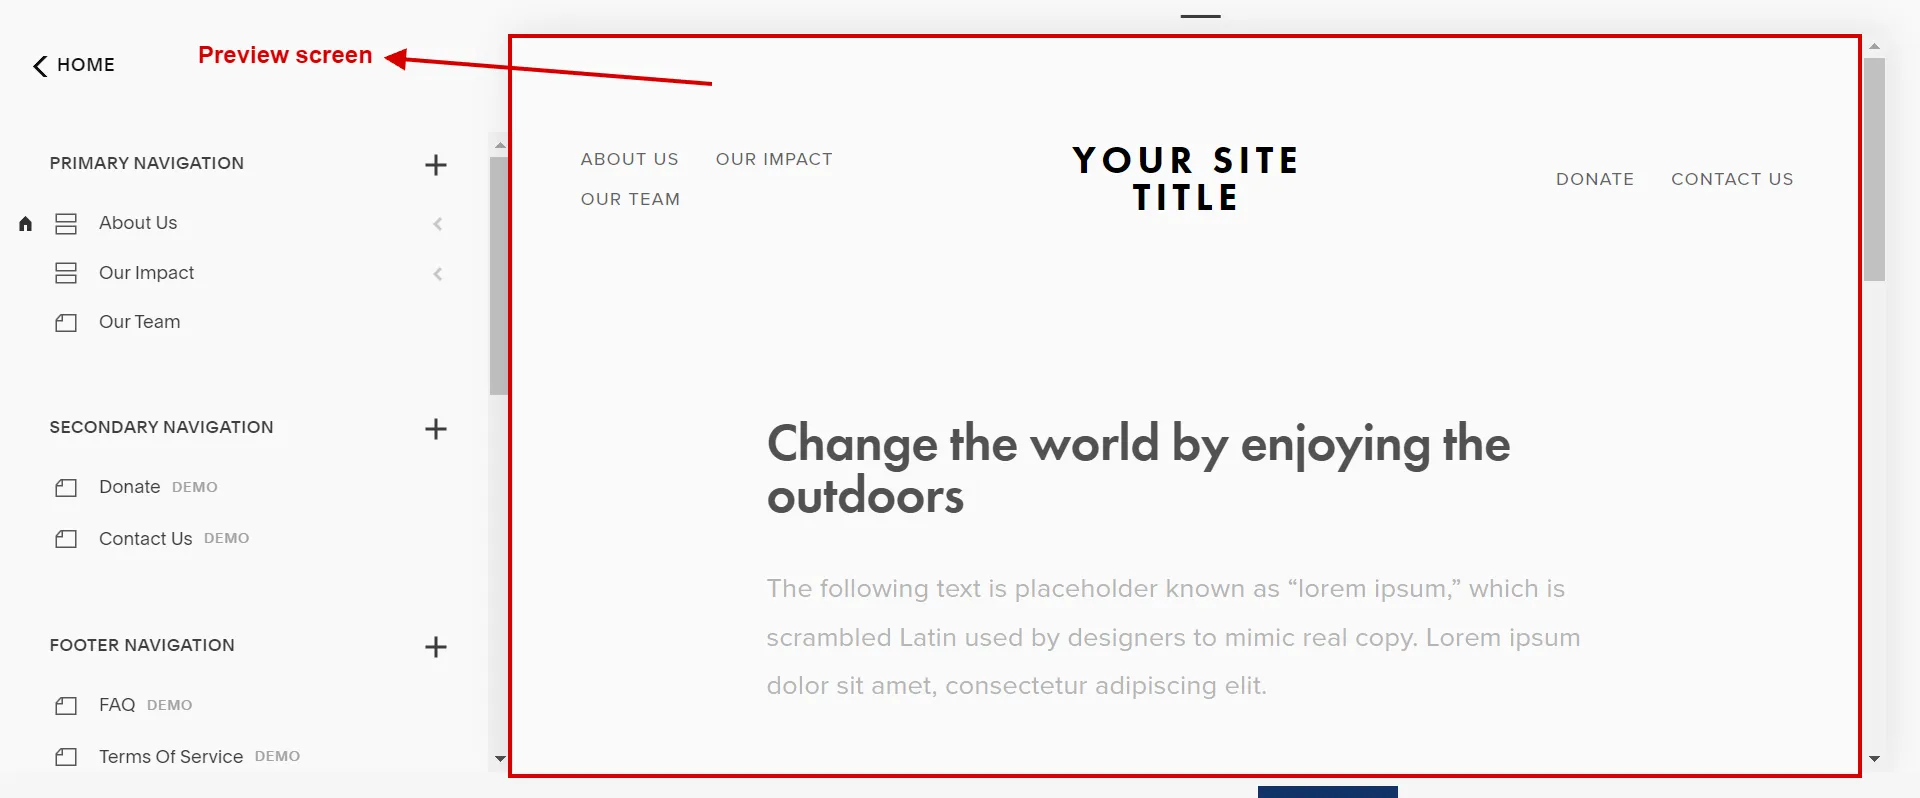 Squarespace template preview screen